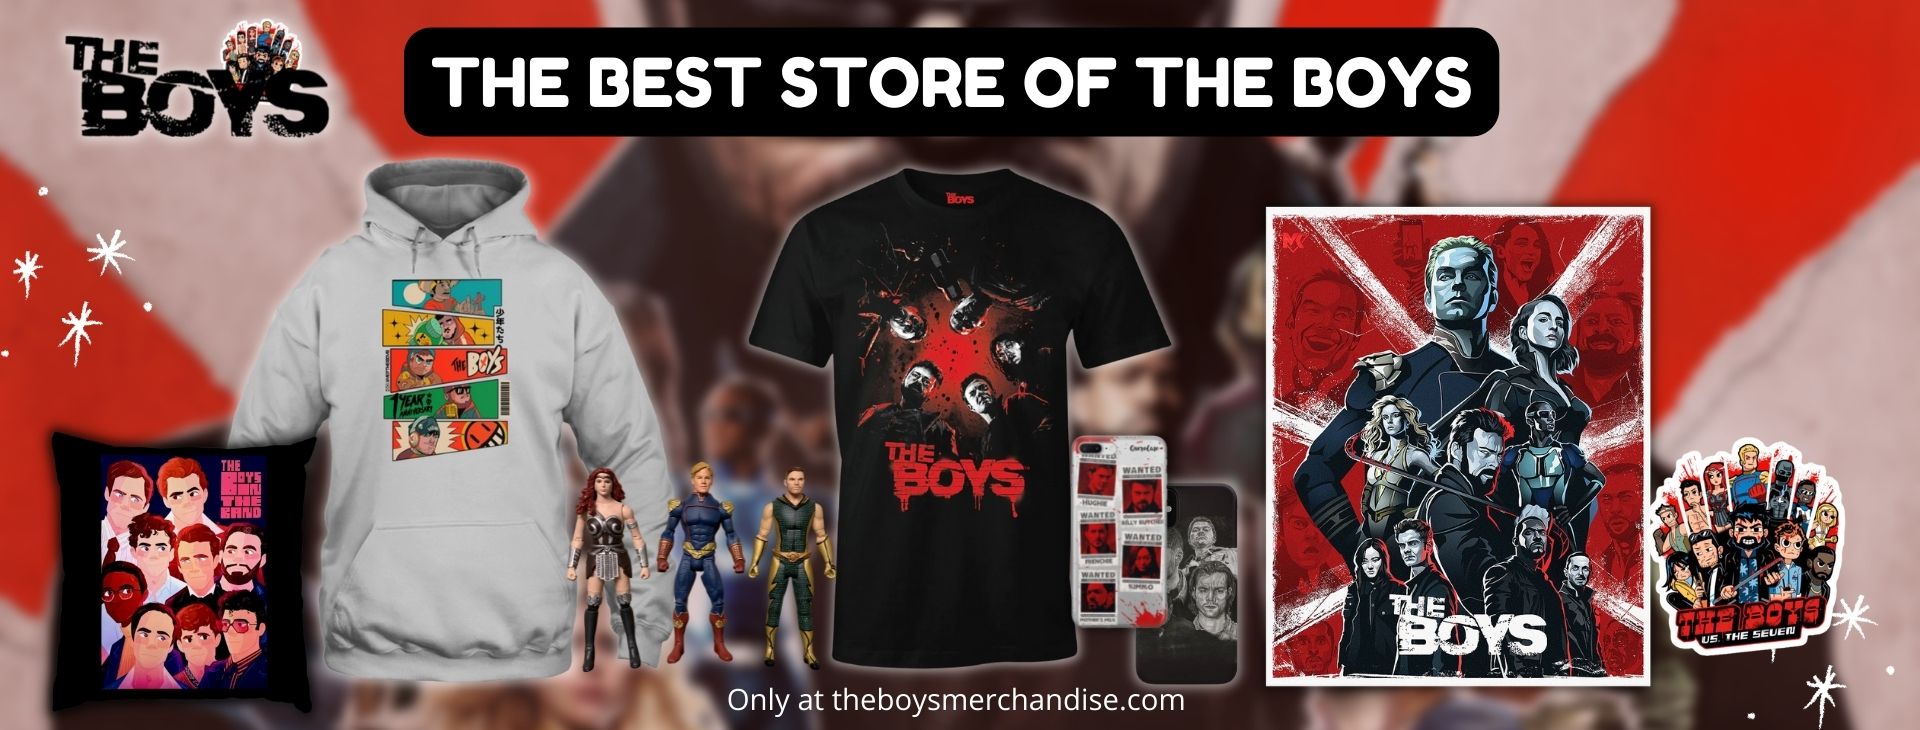 the boys Banner - The Boys Store